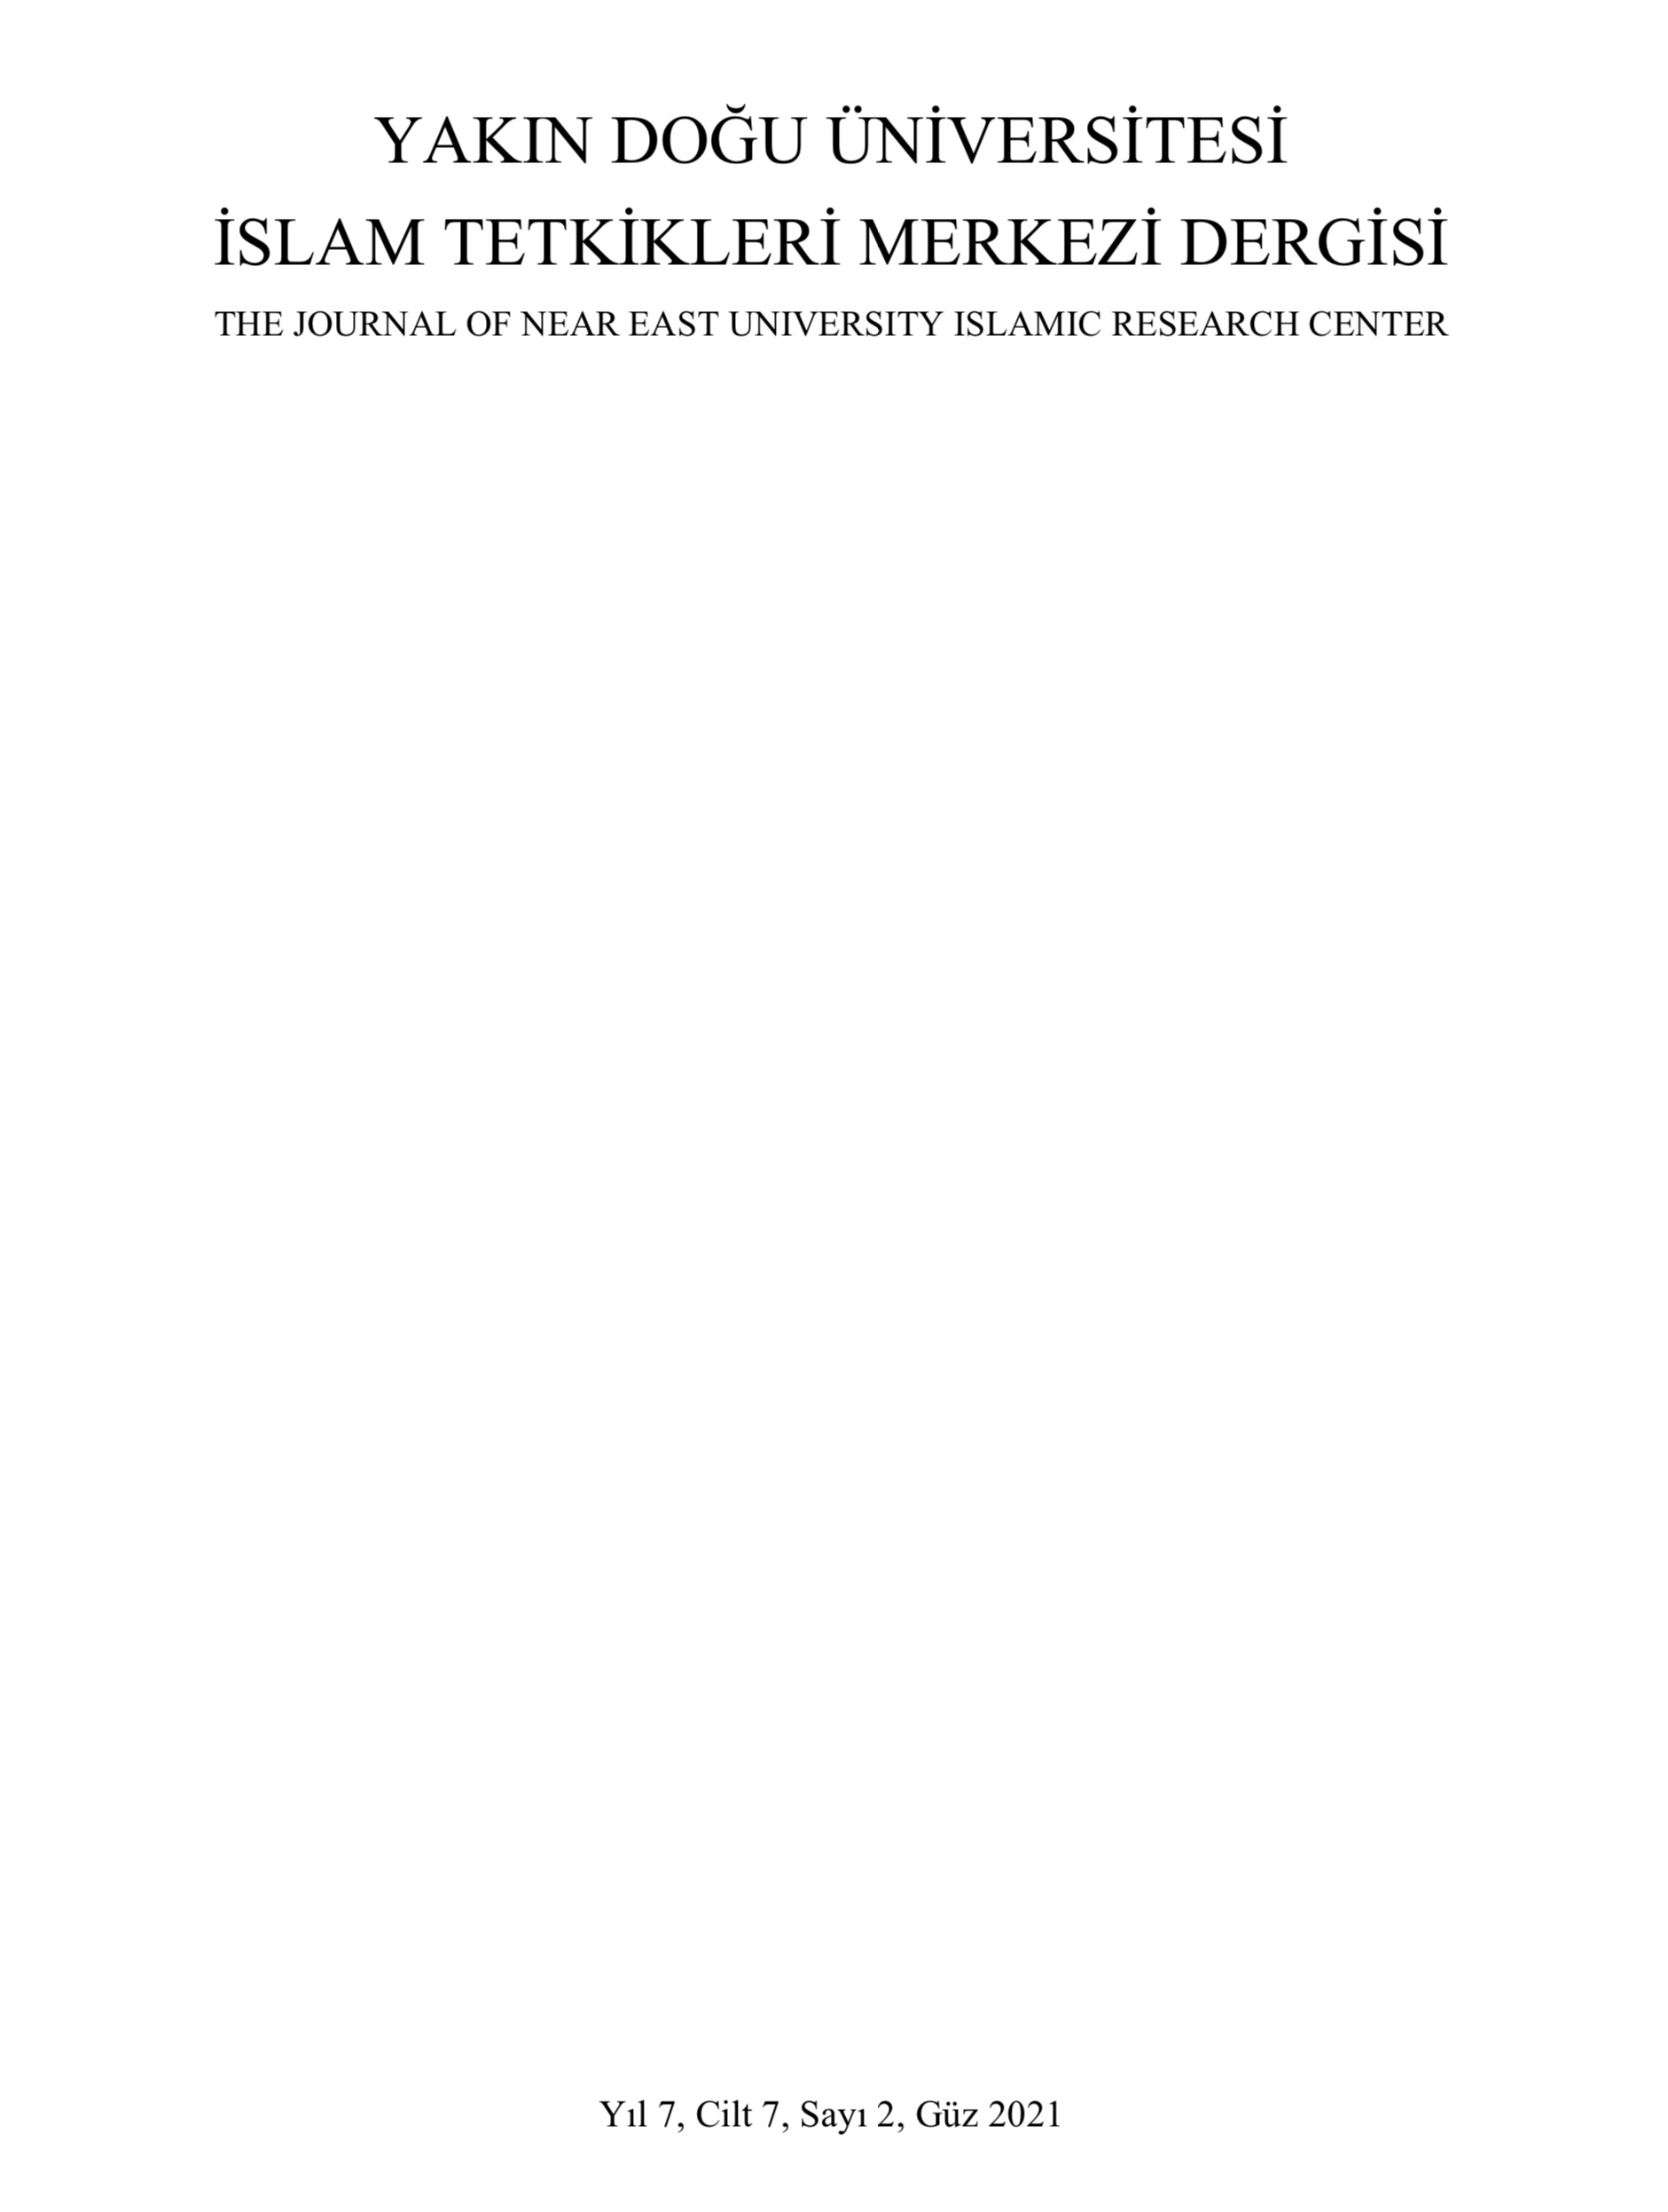 					View Vol. 7 No. 2 (2021): Journal of The Near East University Islamic Research Center
				